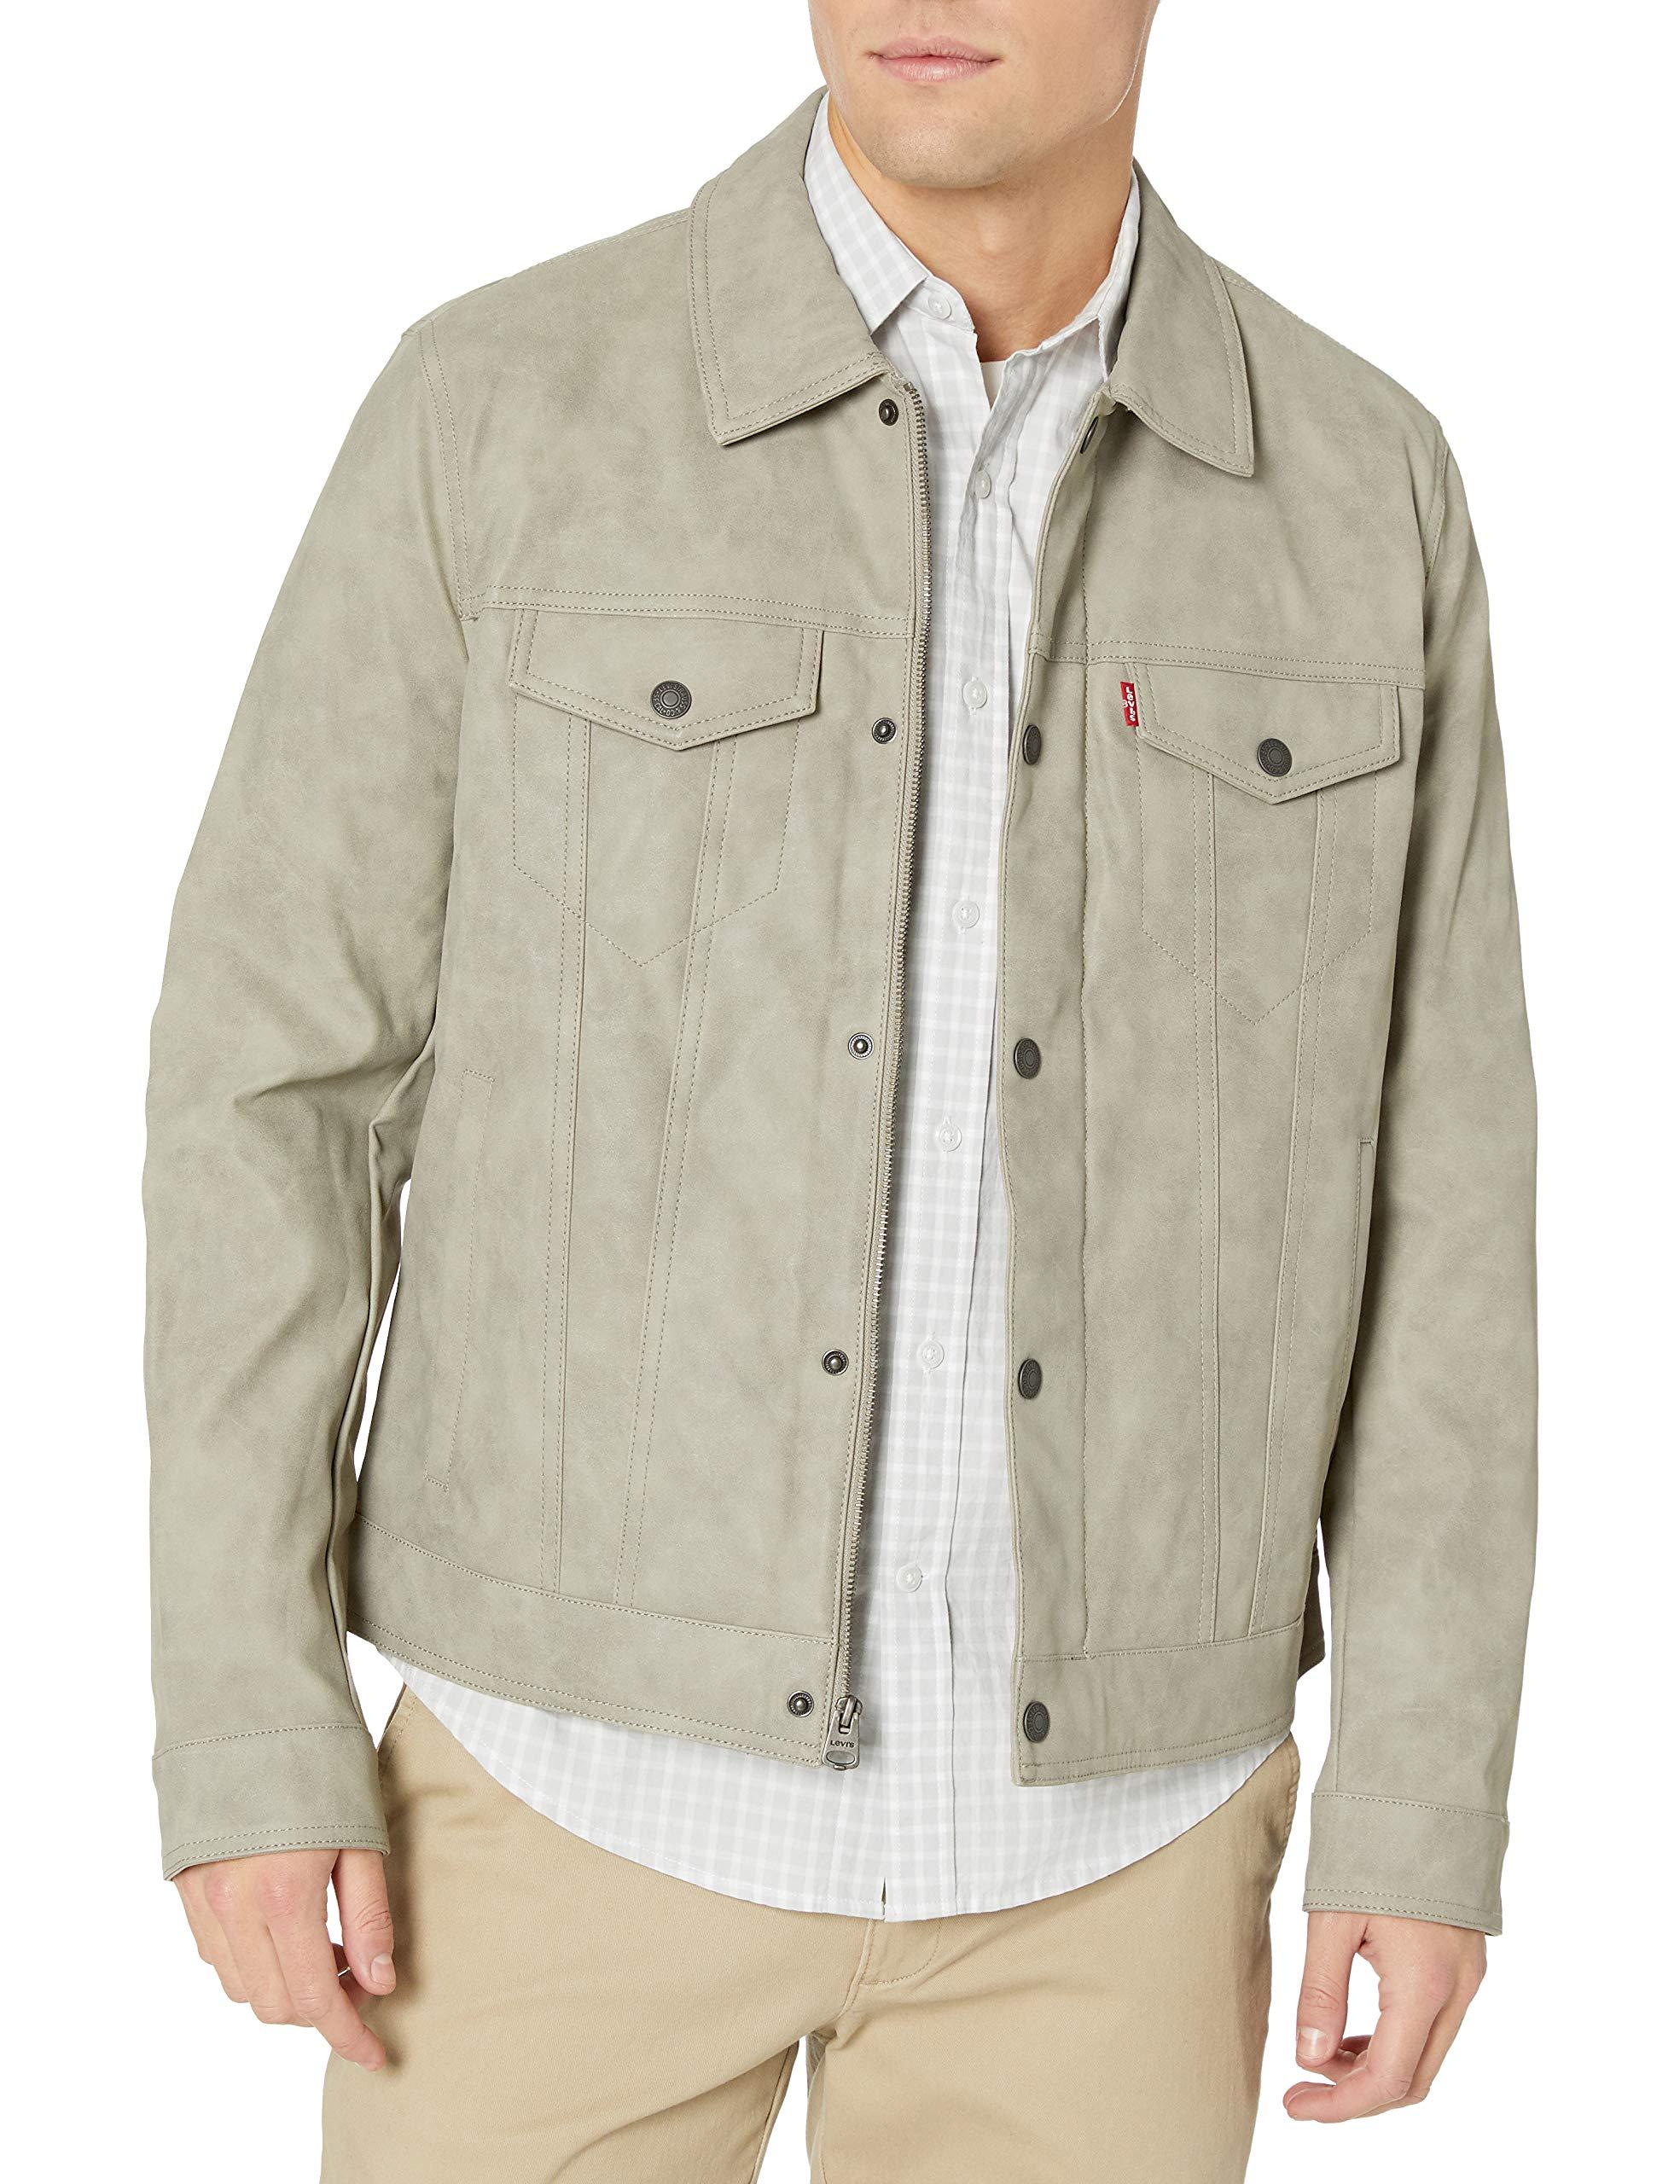 Levi's Faux Leather Classic Trucker Jacket in Light Grey (Gray) for Men